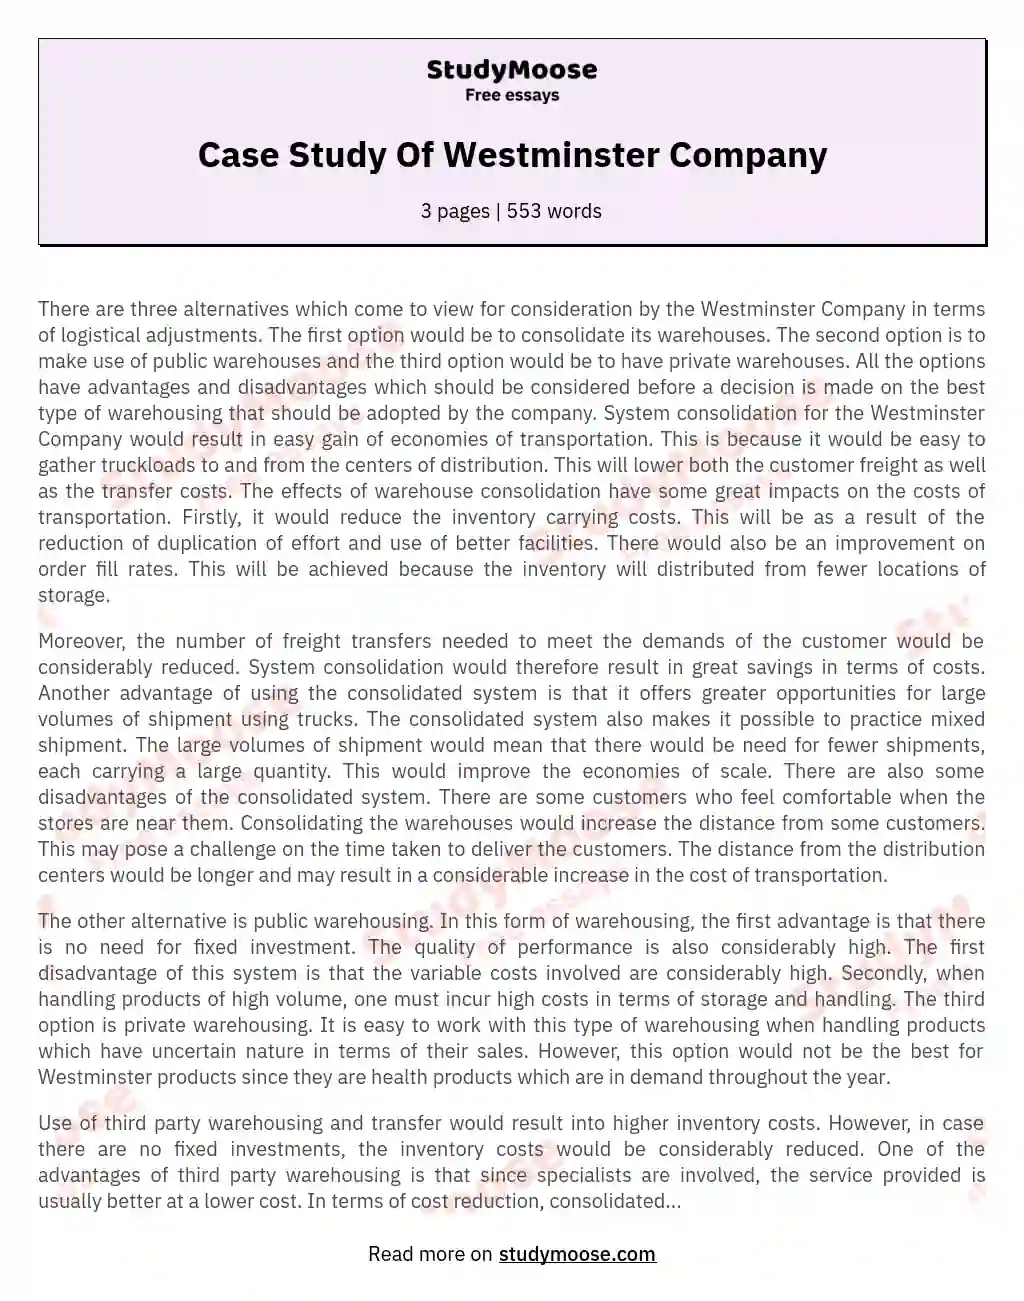 Case Study Of Westminster Company essay